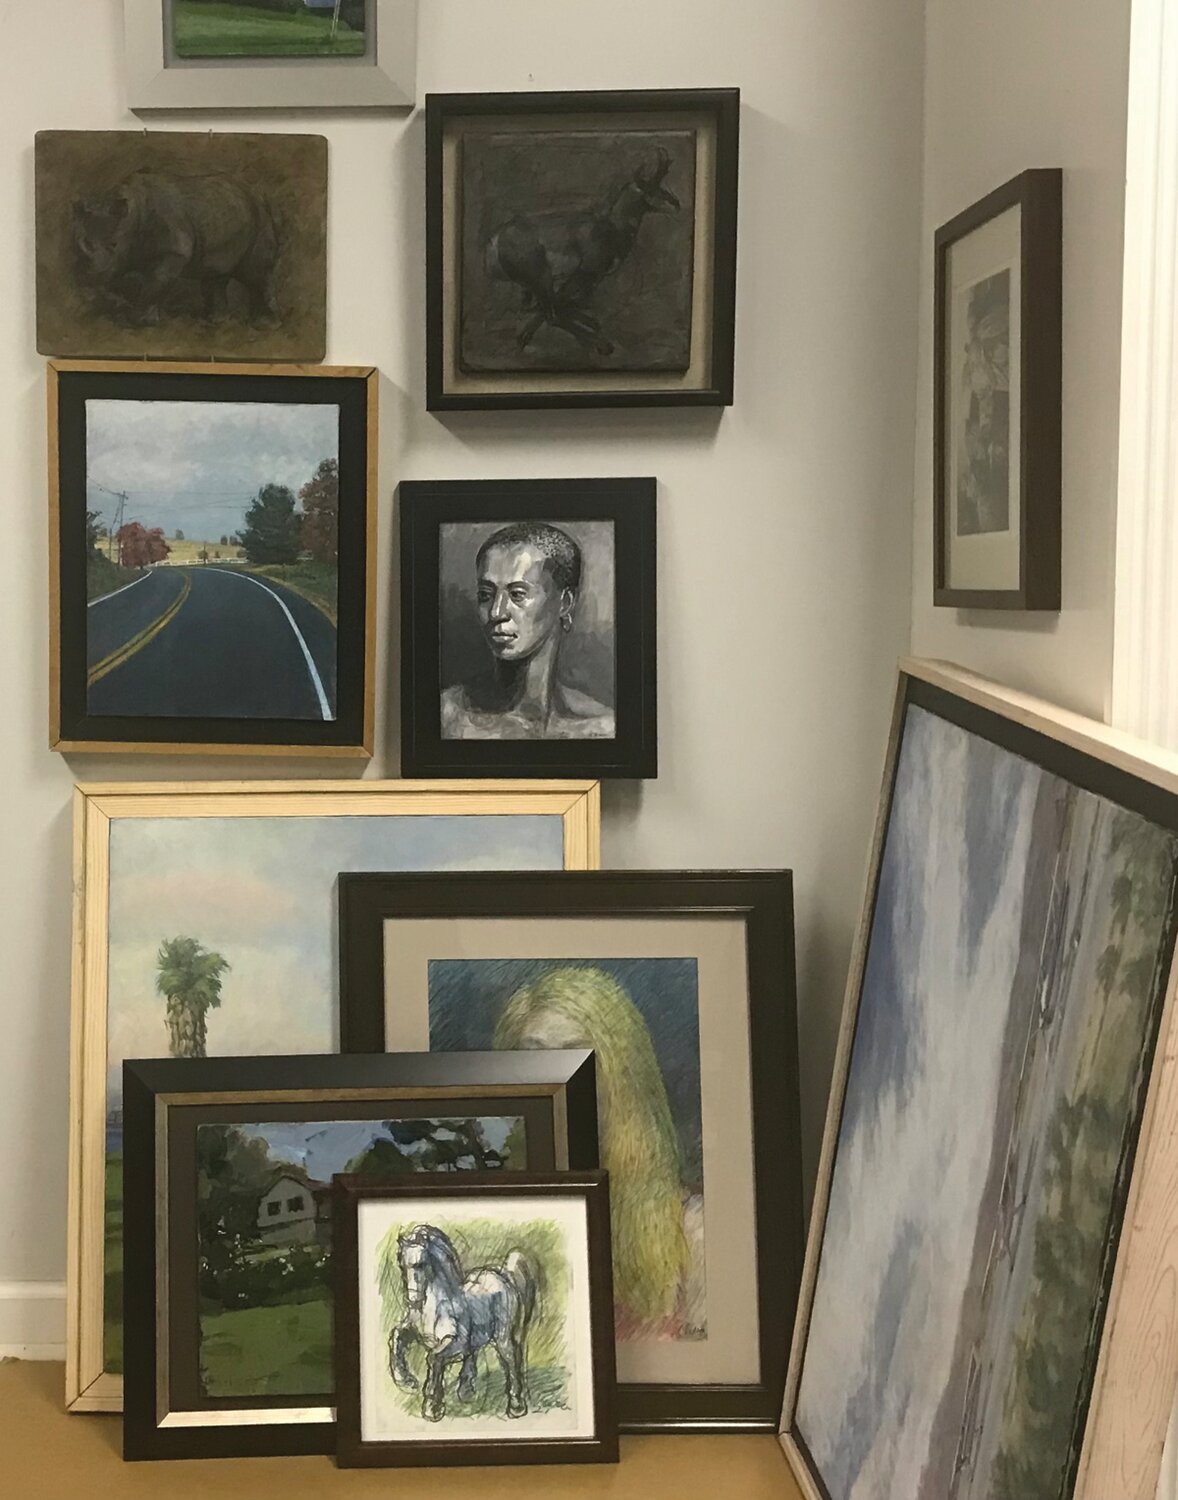 A partial selection of artwork being offered during the “Clear the Studio” sale to benefit New Hope Arts Center and the Arts Council of Princeton.